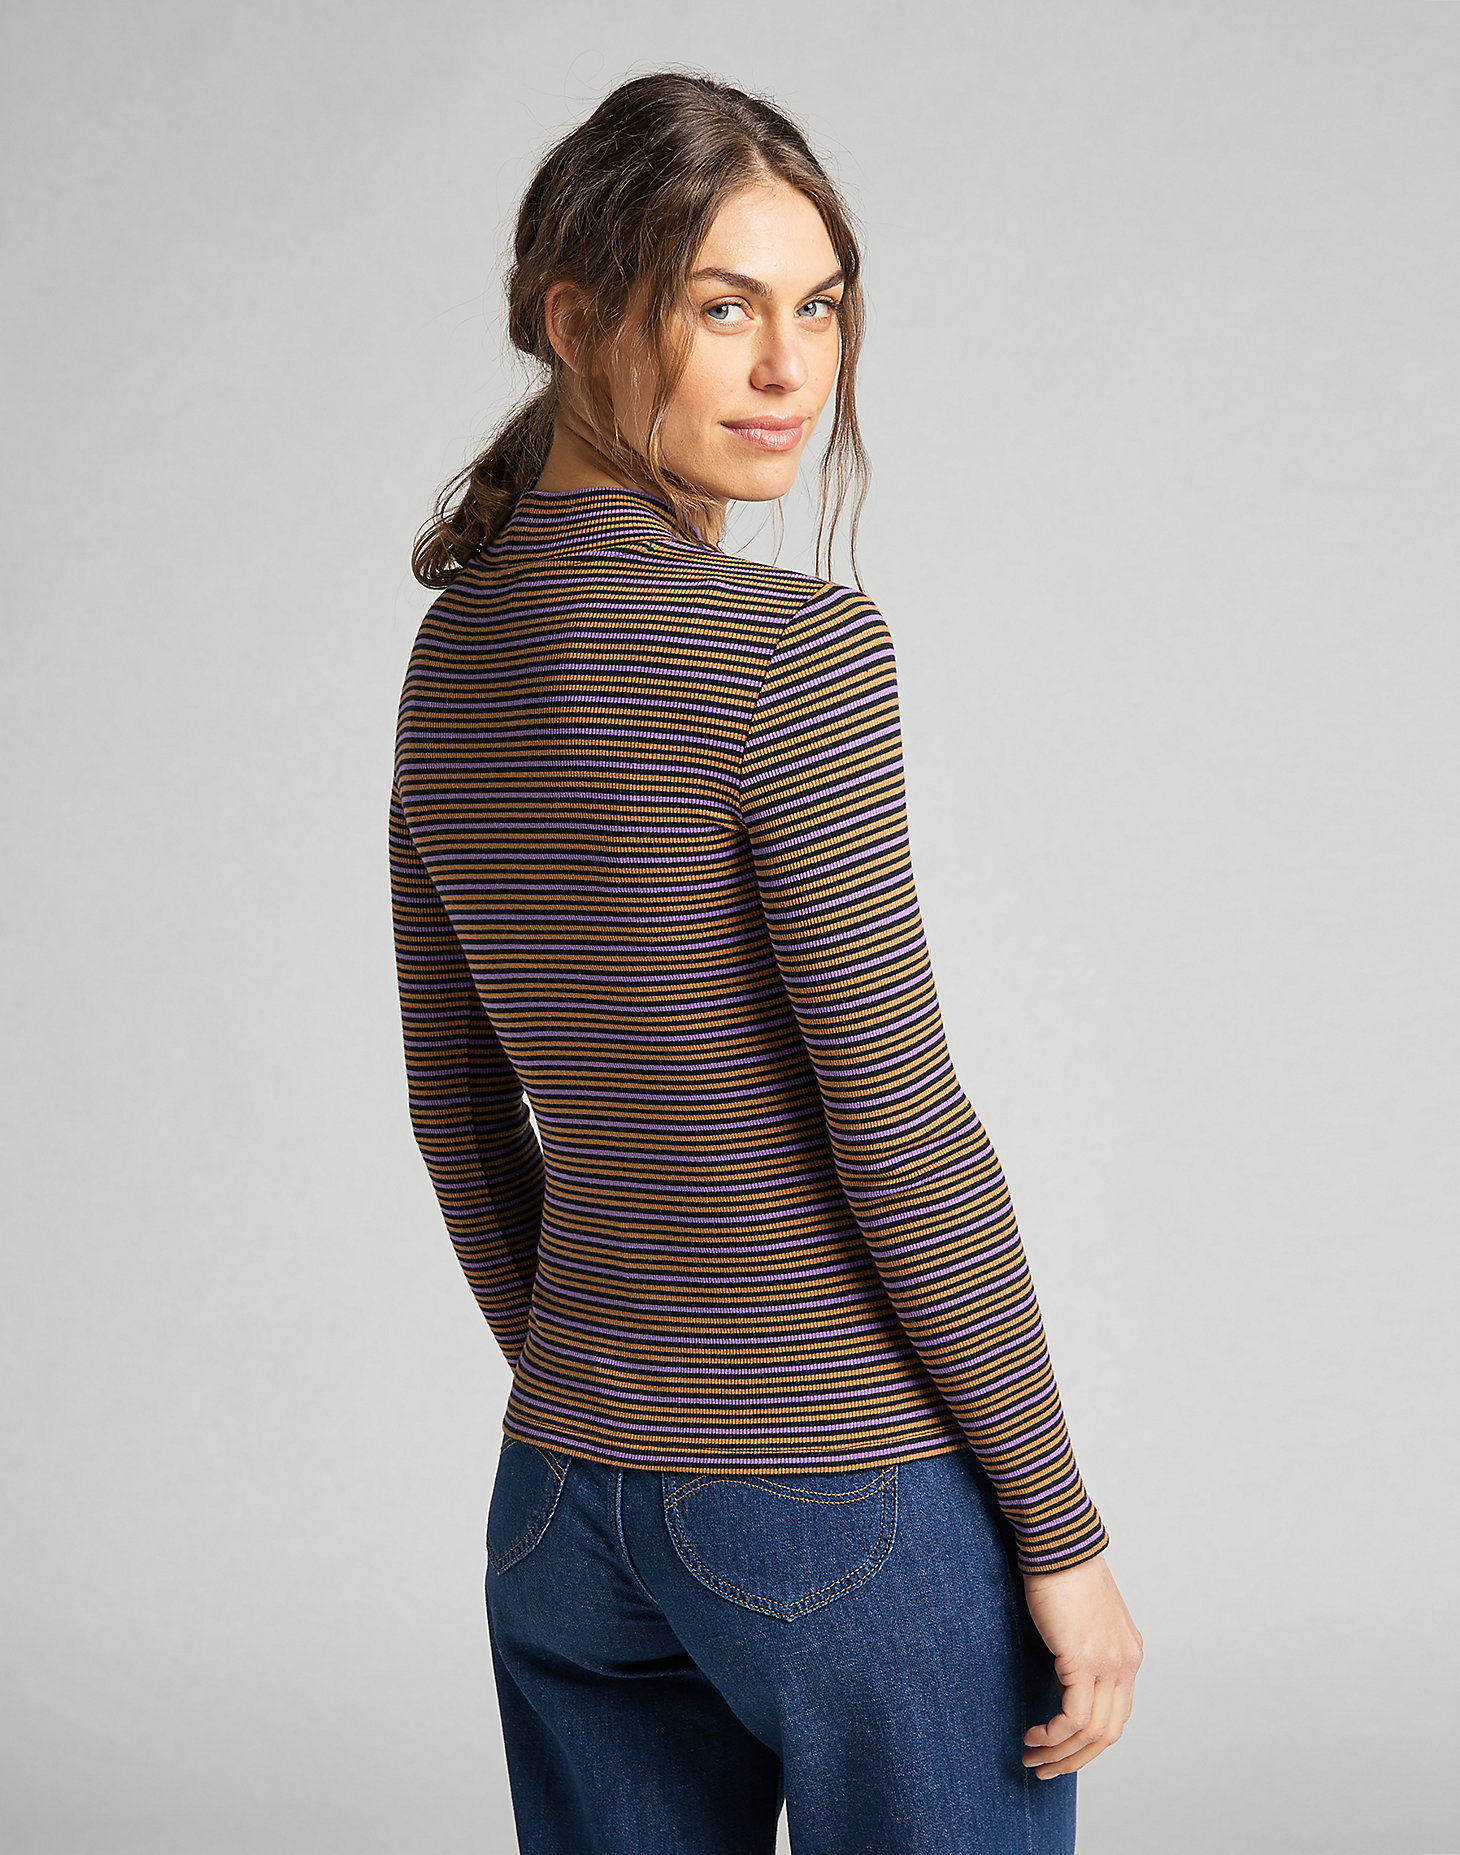 Ribbed Long Sleeve Striped Tee in Black alternative view 5